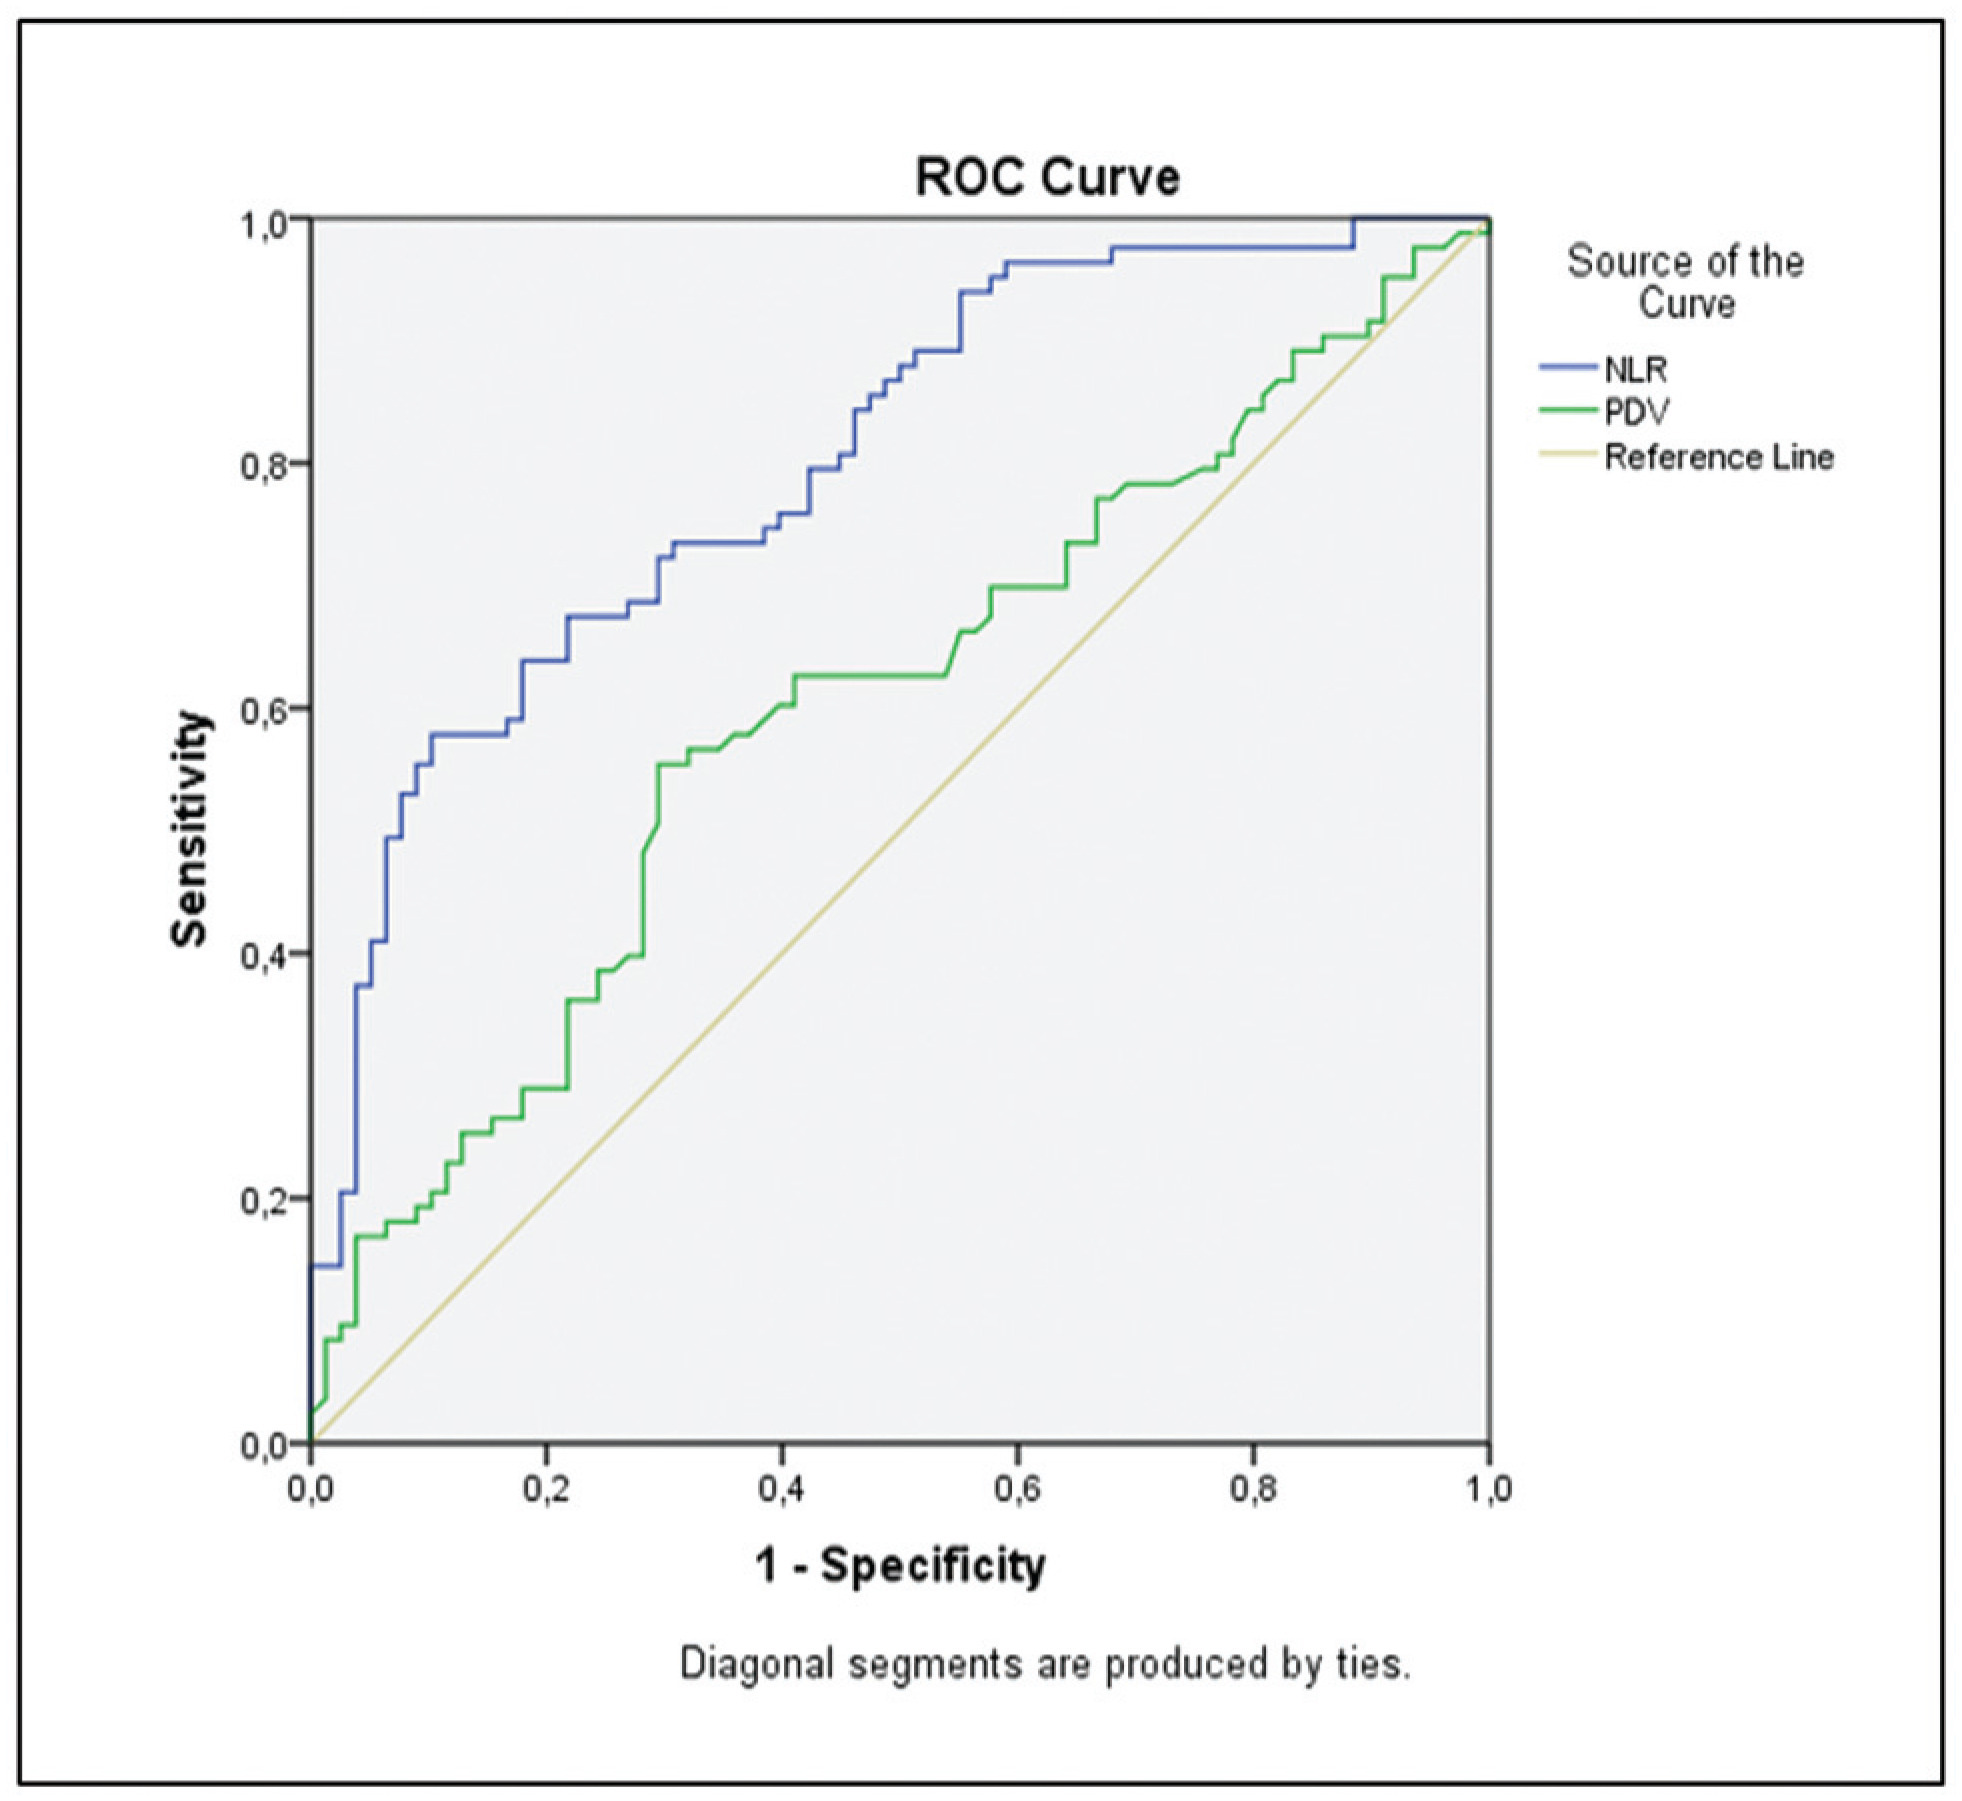 Prediction of Rupture by Complete Blood Count in Tubal Ectopic Pregnancies Treated with a Single-Dose Methotrexate Protocol